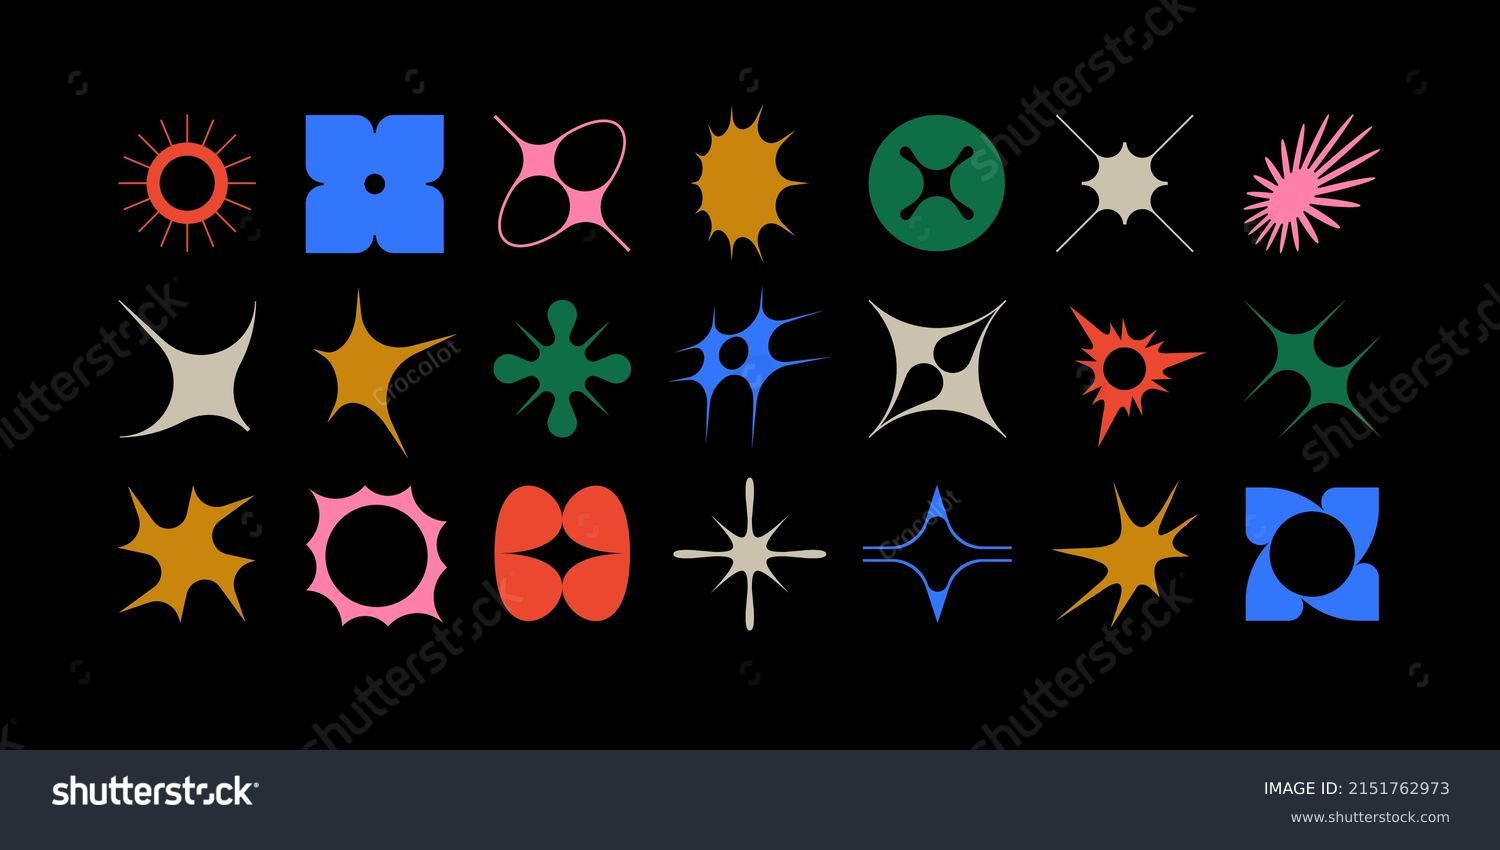 Set of geometric logos space explosion, dazzling flash. Modern bold brutalist objects and shapes of the sun and stars. Colorful minimalistic figures silhouettes. Contemporary design. #2151762973